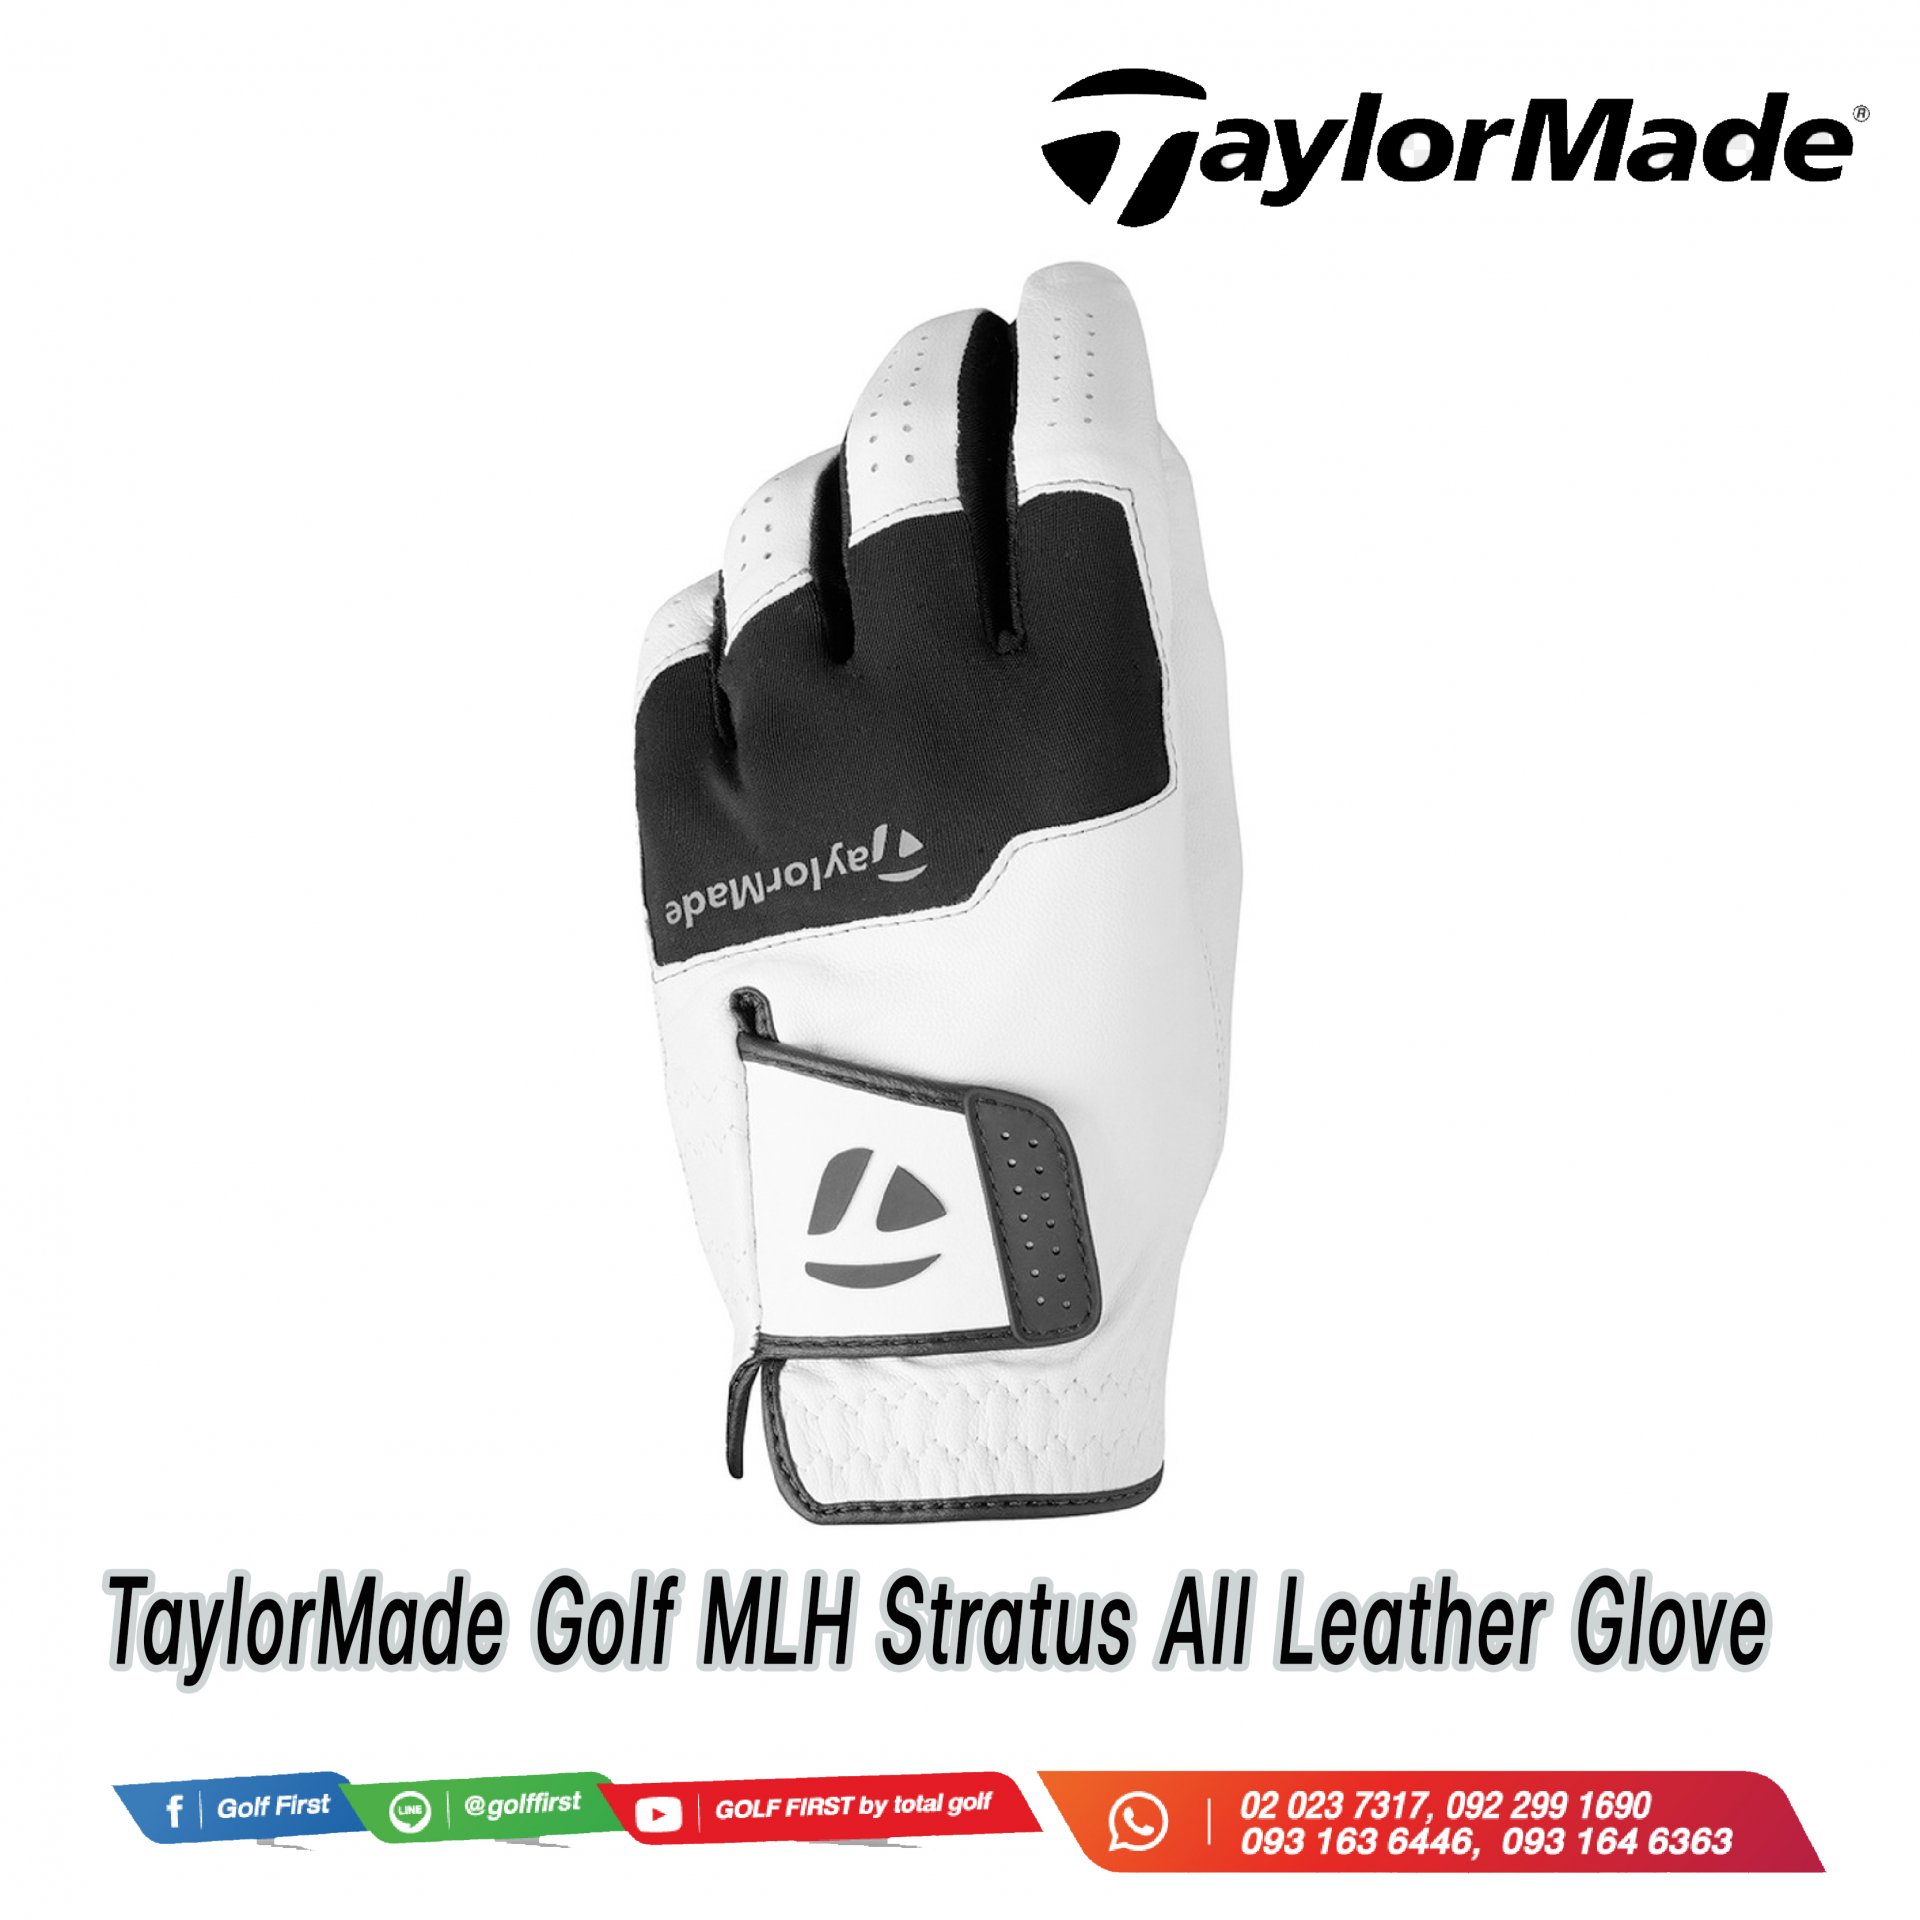 TaylorMade Golf MLH Stratus All Leather Glove